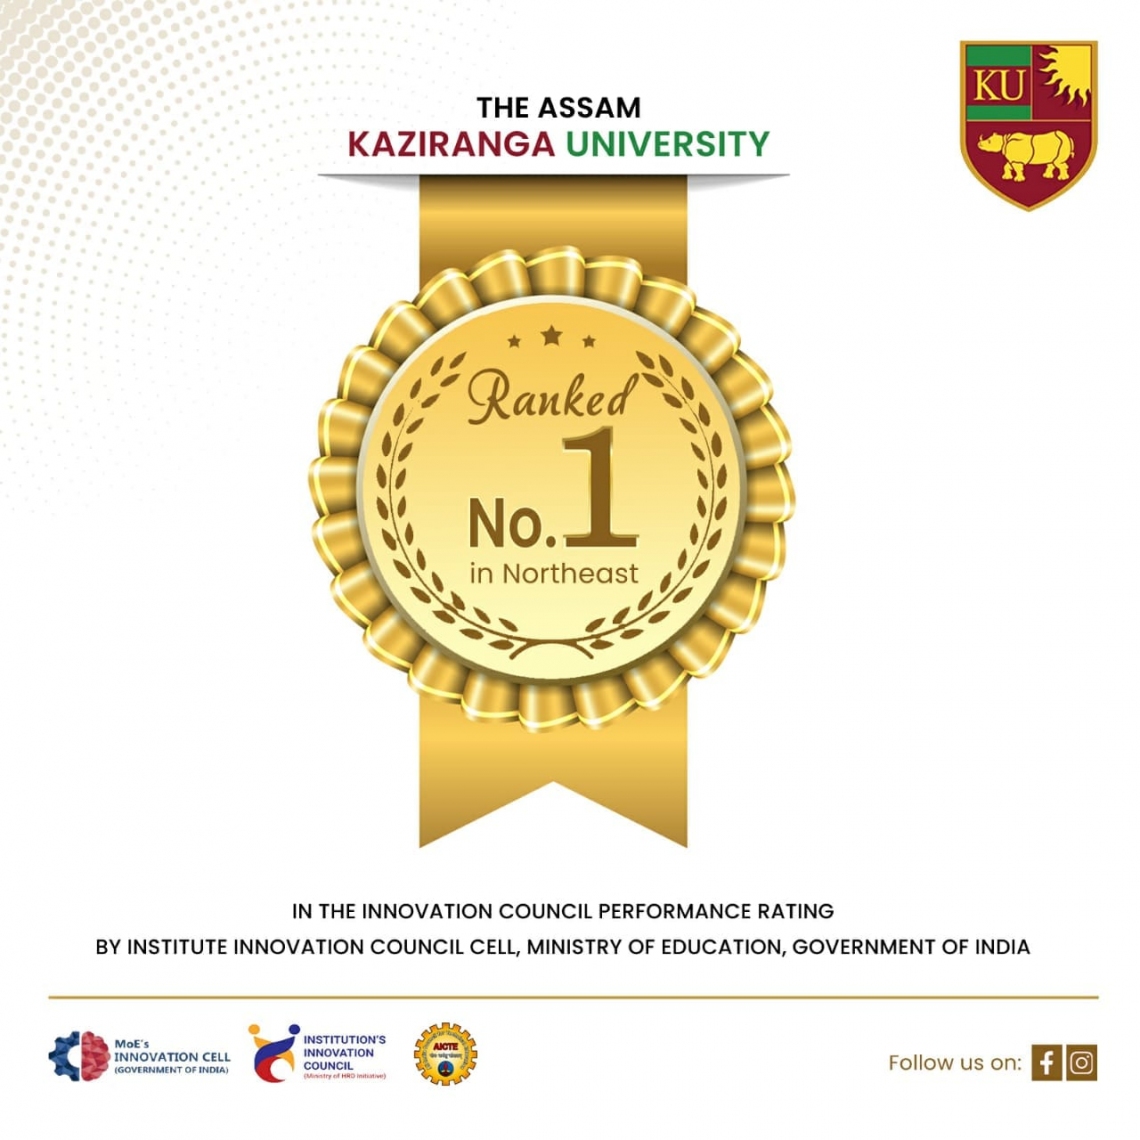 KU have achieved the top spot in the Innovation Council Performance Rating